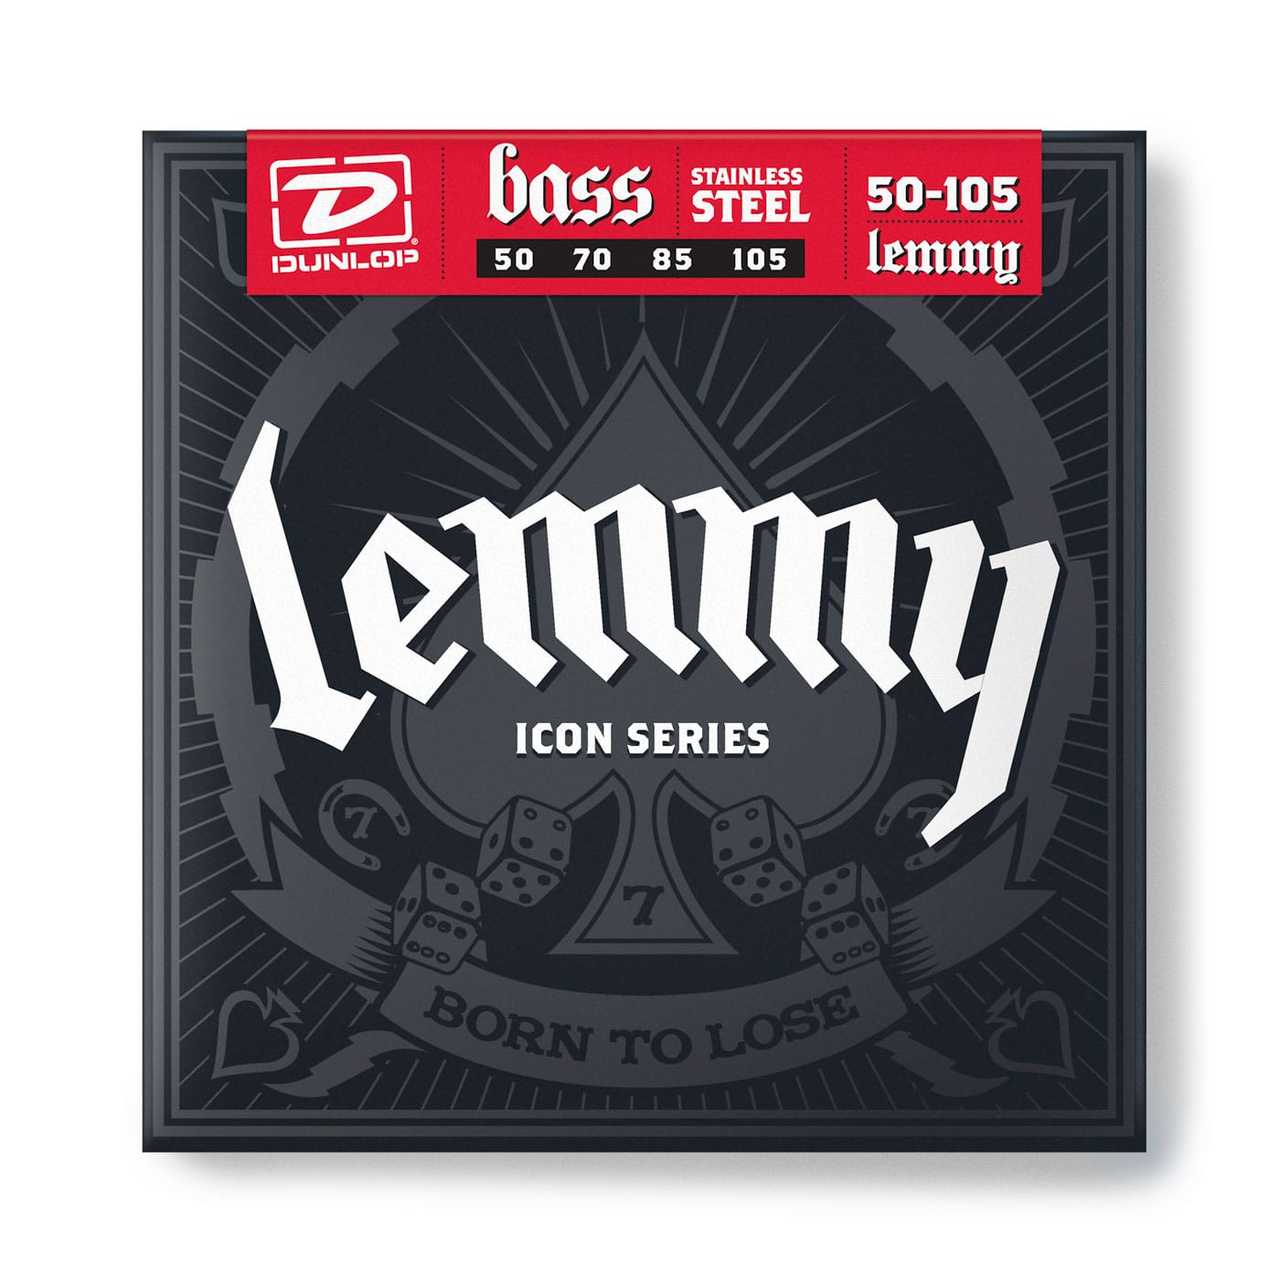 Dunlop Stainless Steel Round Wound Bass Strings